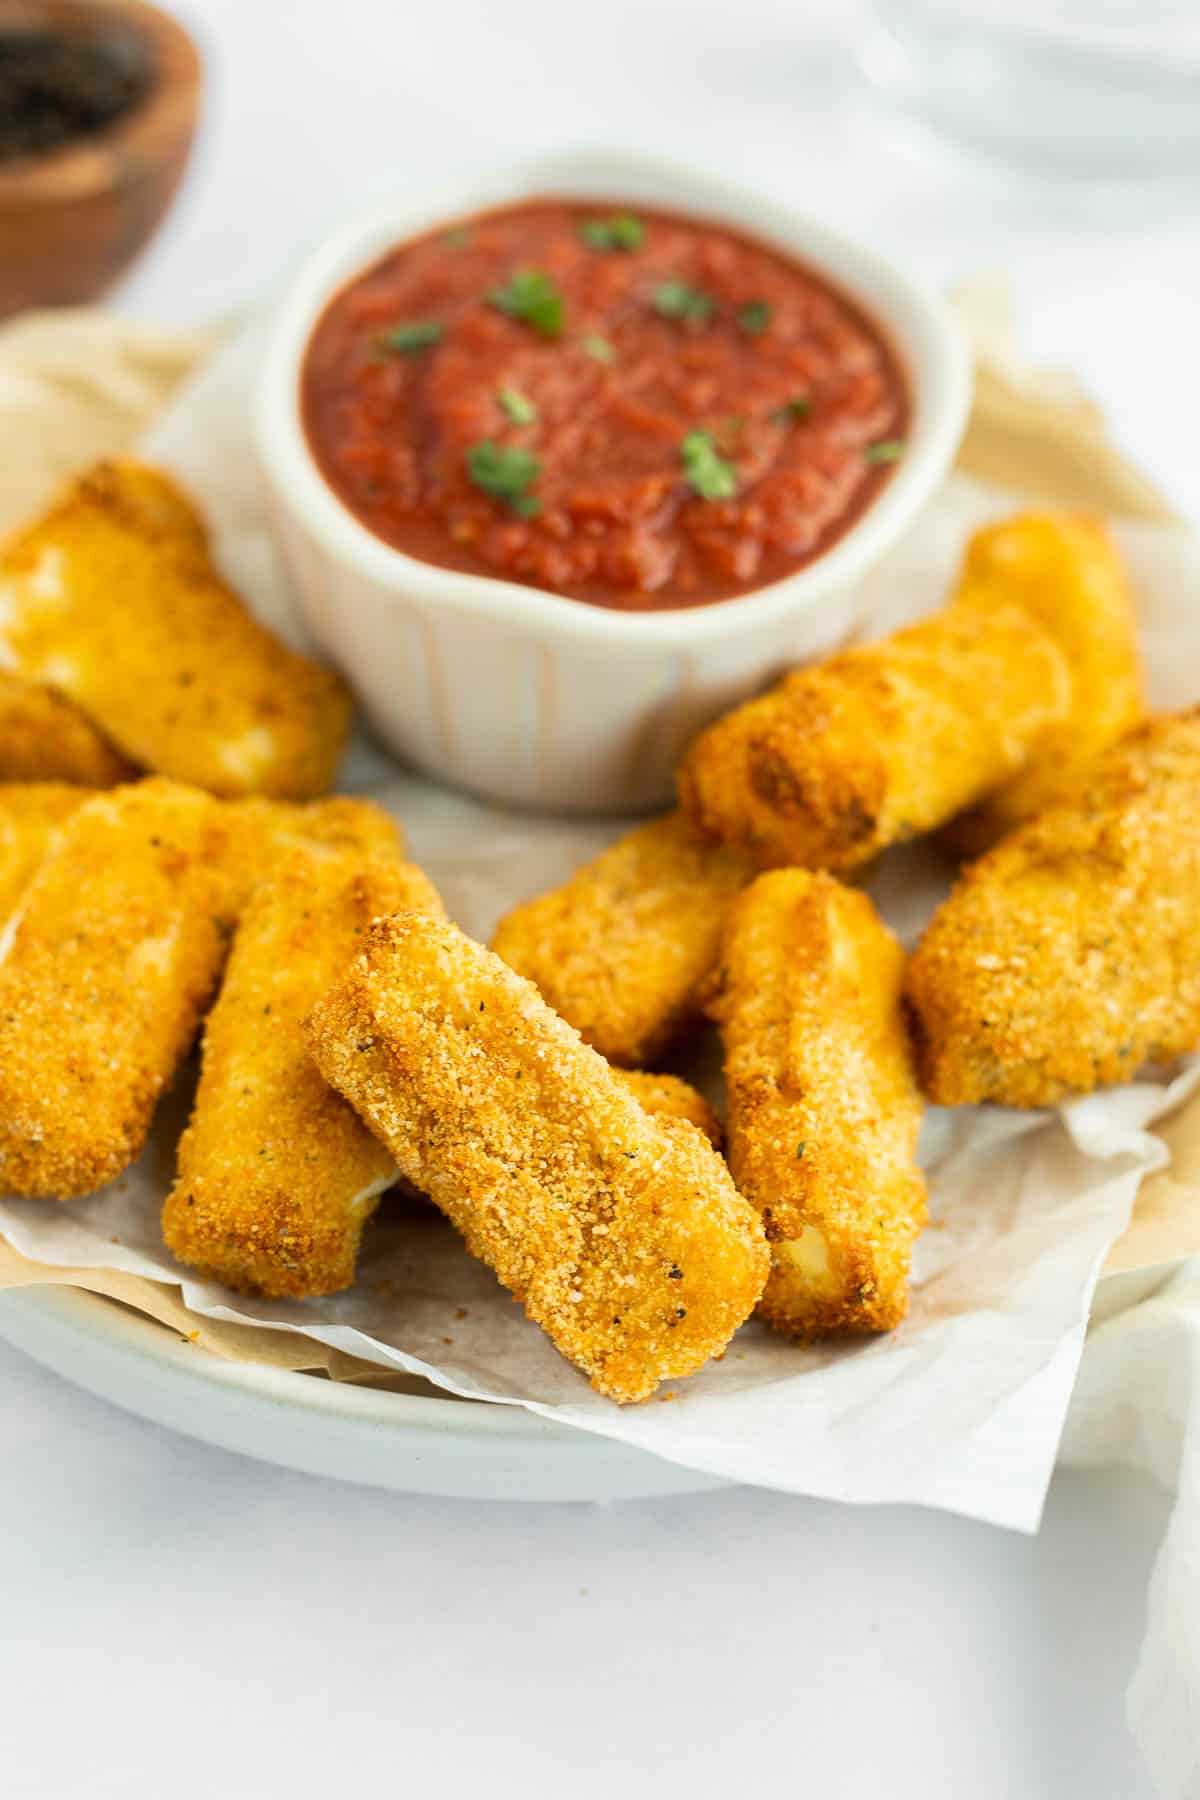 healthy gluten free mozz sticks on parchment lined plate.